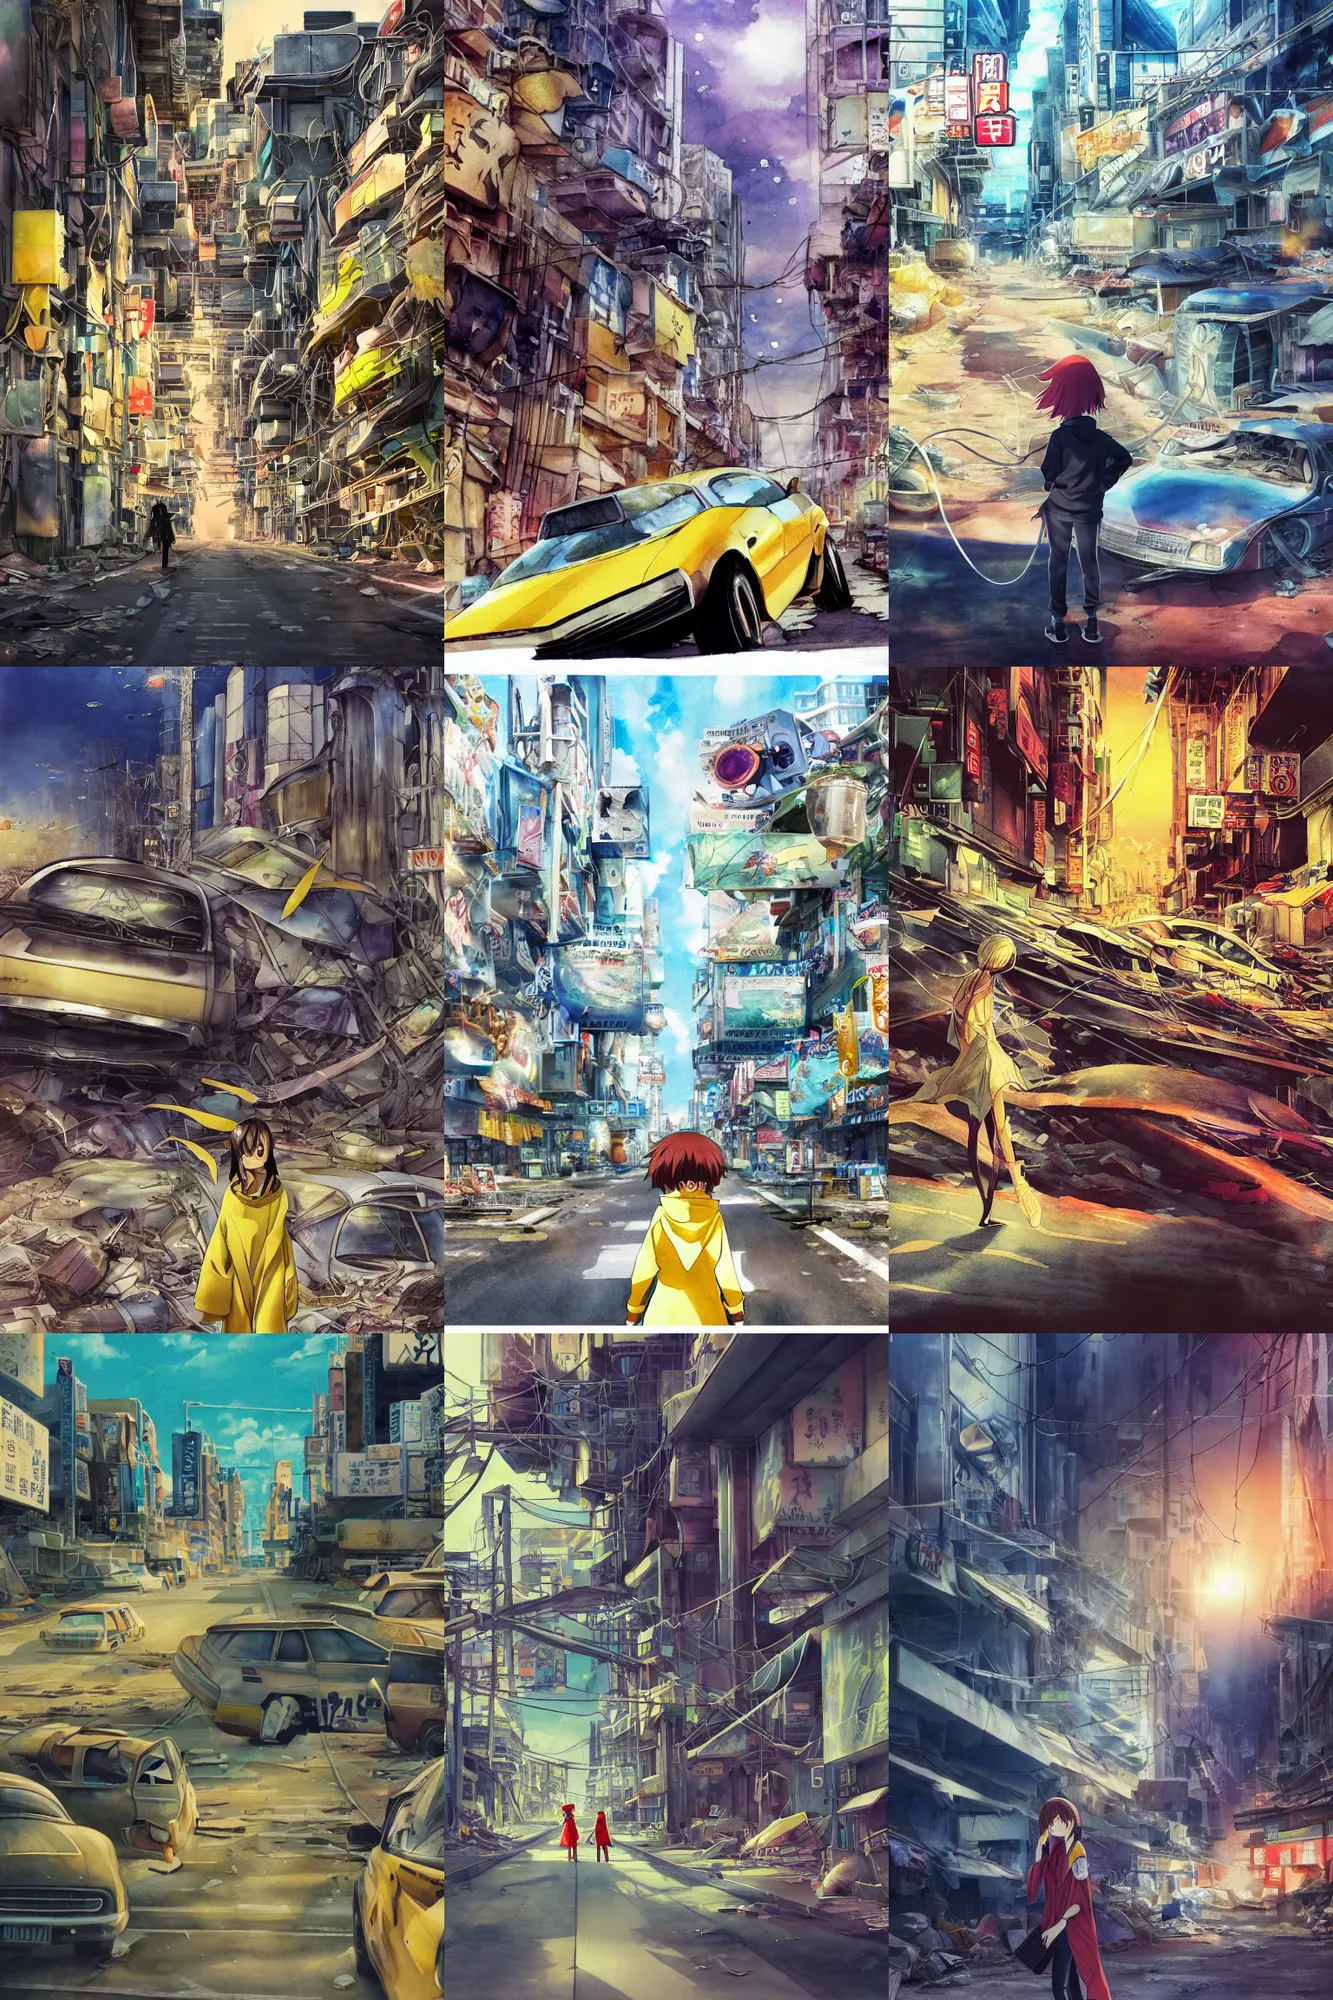 Prompt: incredible anime movie scene, phantom crash, vanishing point, hoody woman explorer, watercolor, underwater market, empty road, coral reef, billboards, harsh bloom lighting, rim light, abandoned city, paper texture, movie scene, caustic shadows, deserted shinjuku junk town, bright sun ground, wires, telephone pole, pipes, yellow, red, dusty